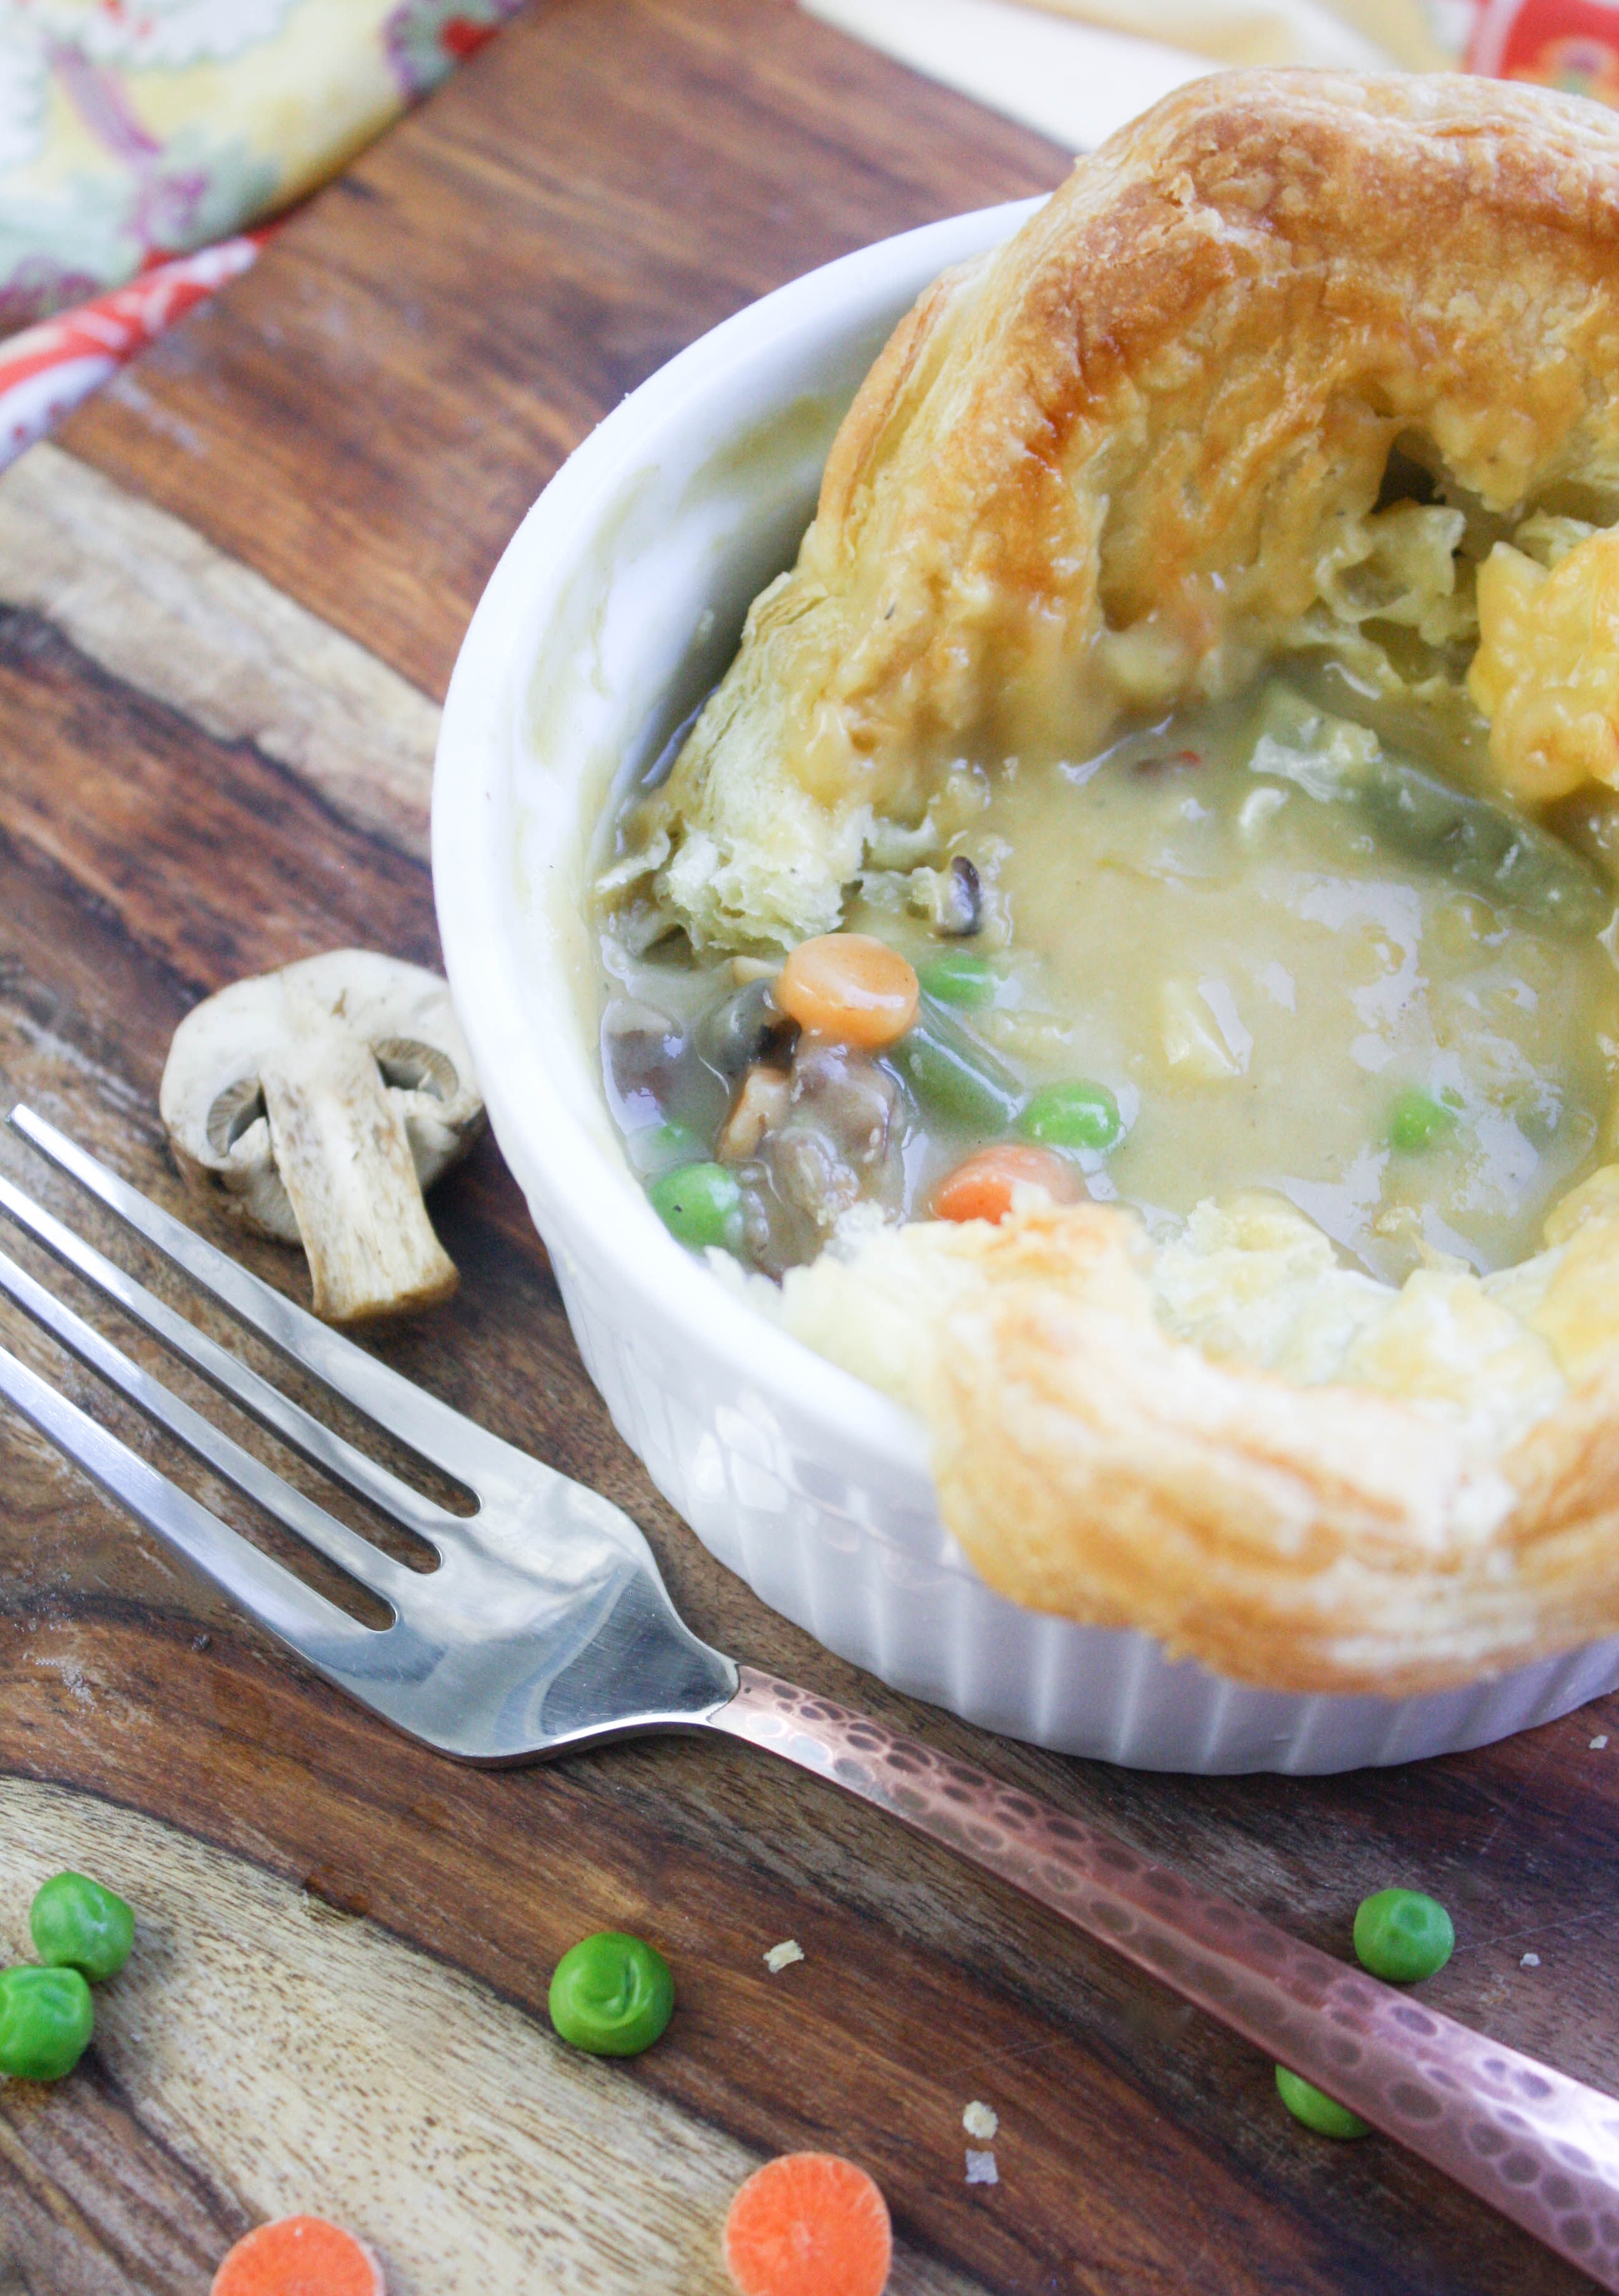 Easy Puffy Pastry Vegetable Pot Pies are an amazingly wonderful dish to serve when it's cold. Easy Puffy Pastry Vegetable Pot Pies are so tasty and filling. You'll love this meatless meal.